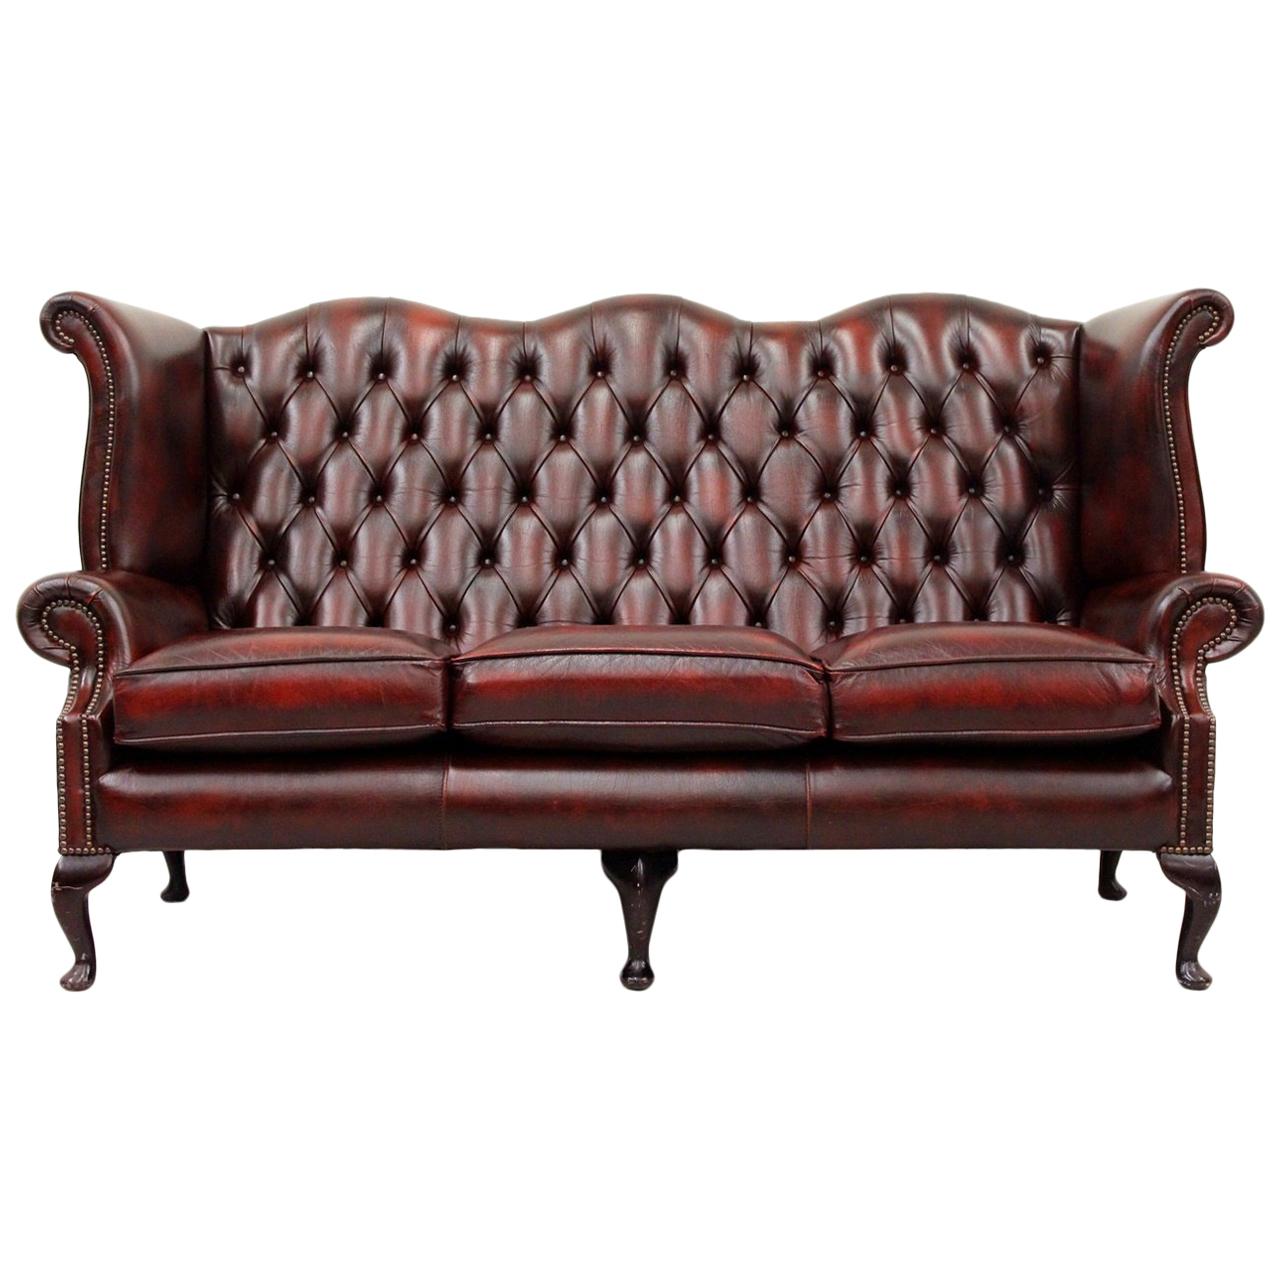 Chesterfield Sofa Leather Antique Vintage Couch English Chippendale For Sale